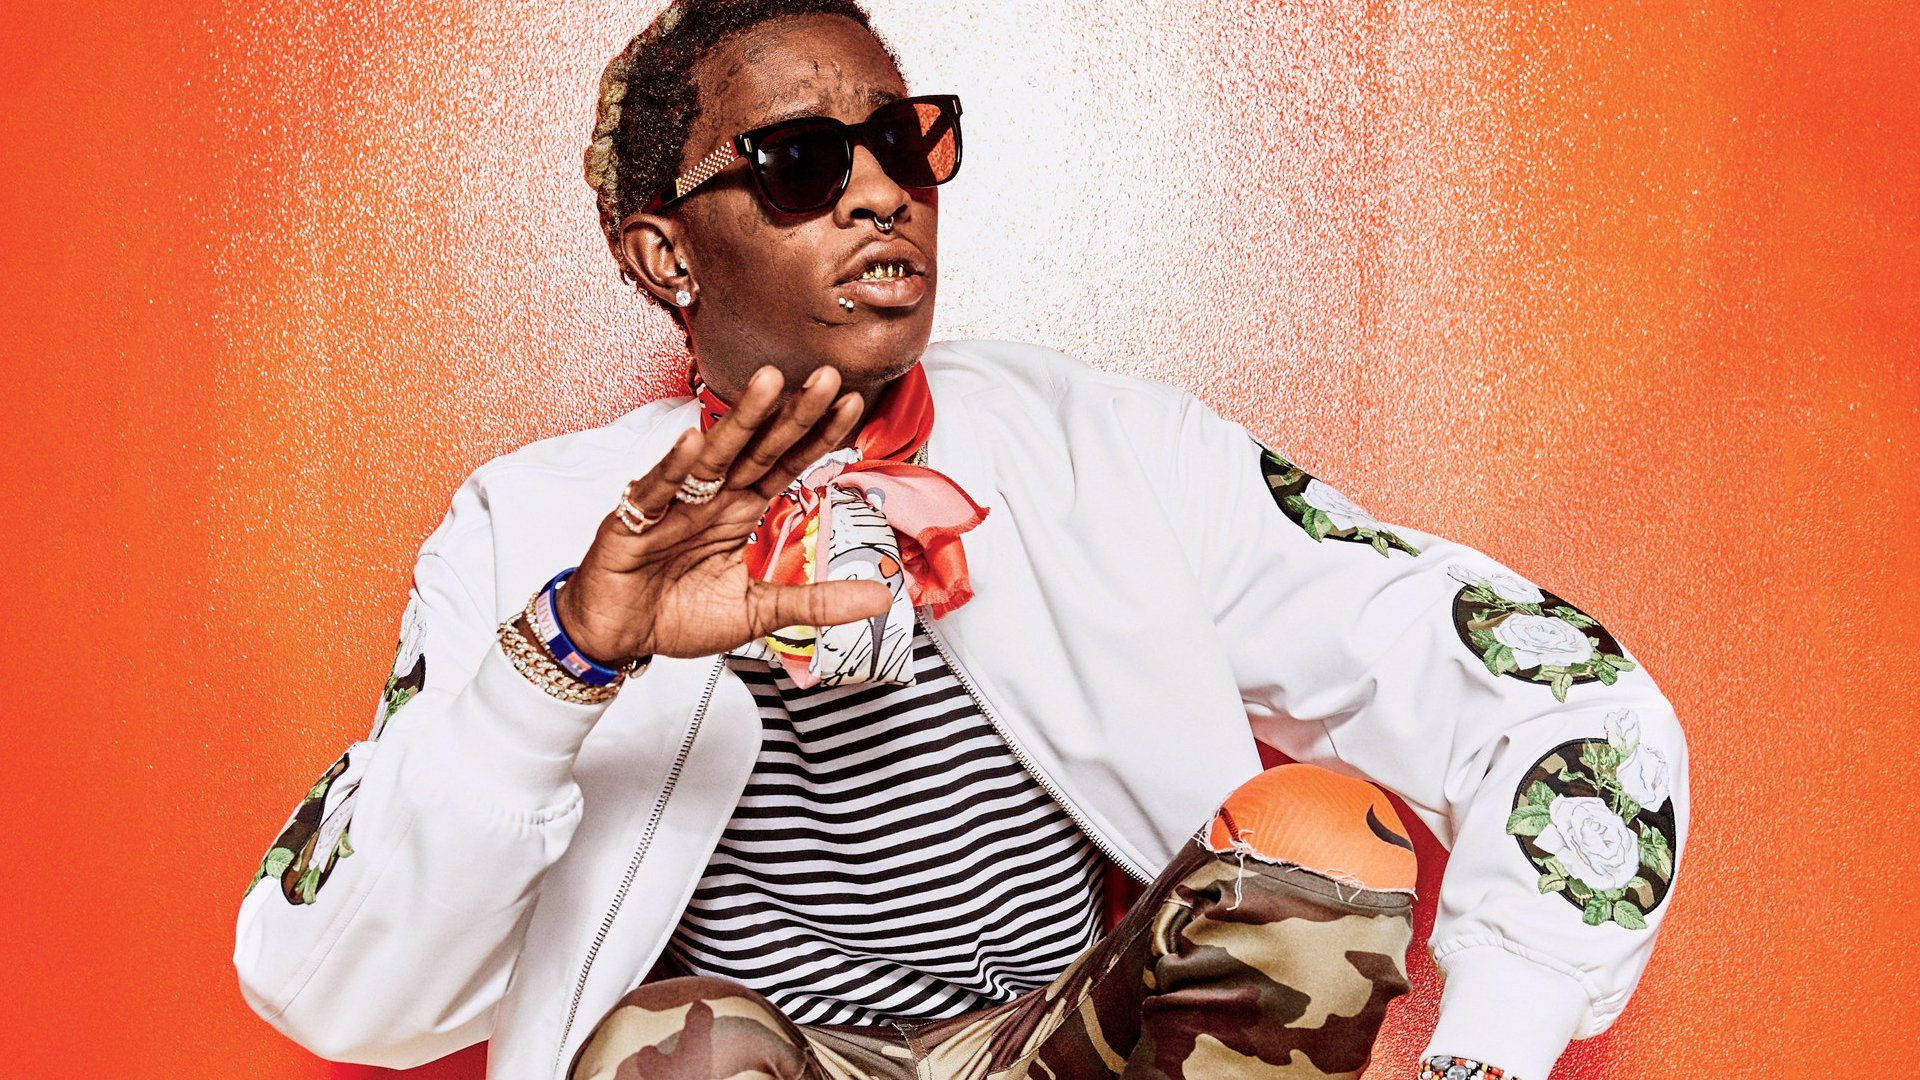 Young Thug Looking As Stylish As Ever